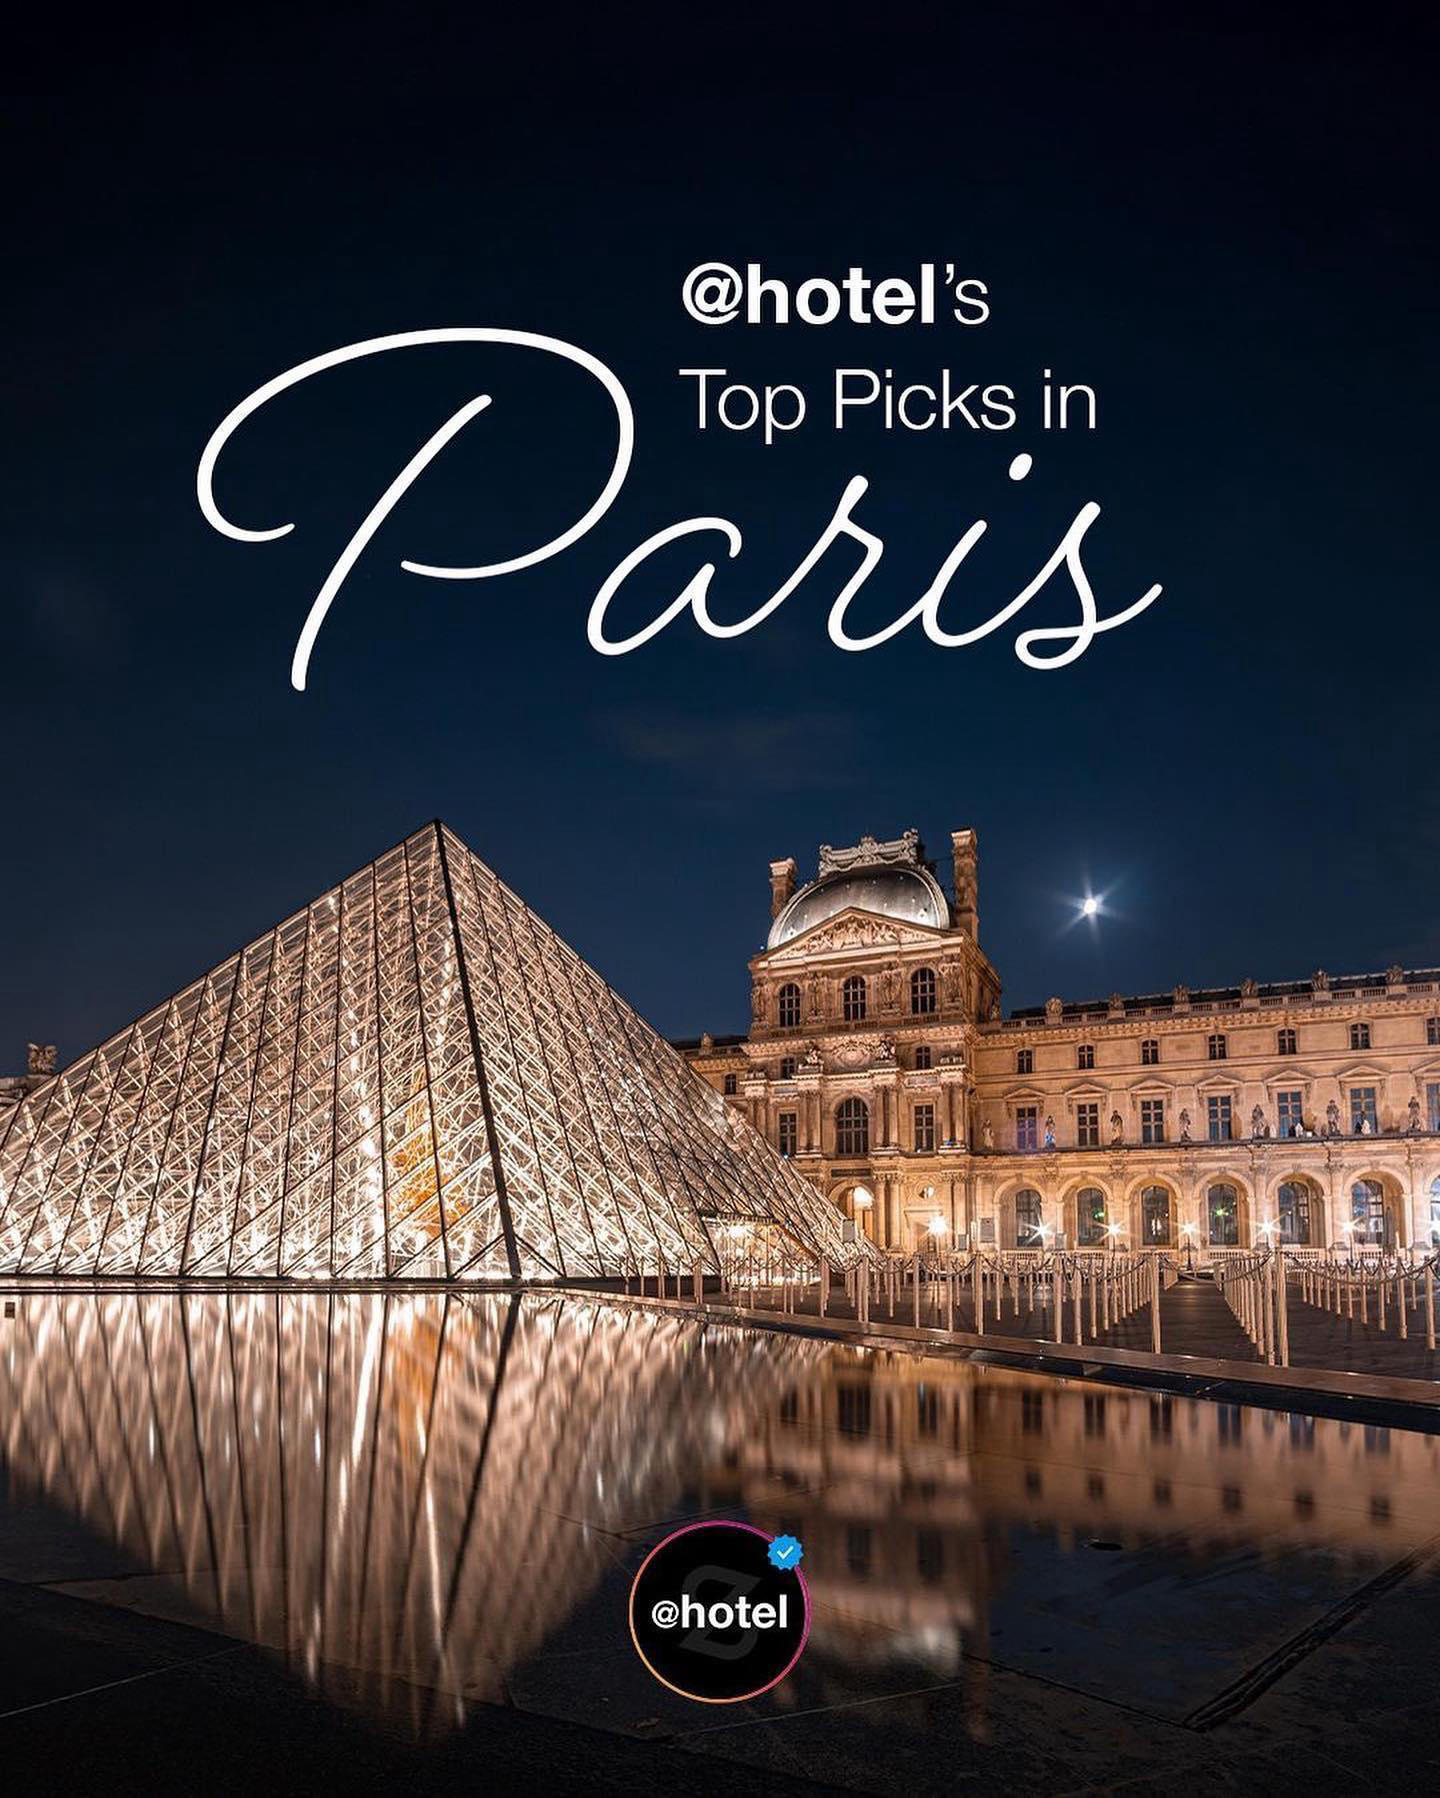 Paris France 🇫🇷 Travel | Hotels | Food | Tips - Check out our top picks in Paris